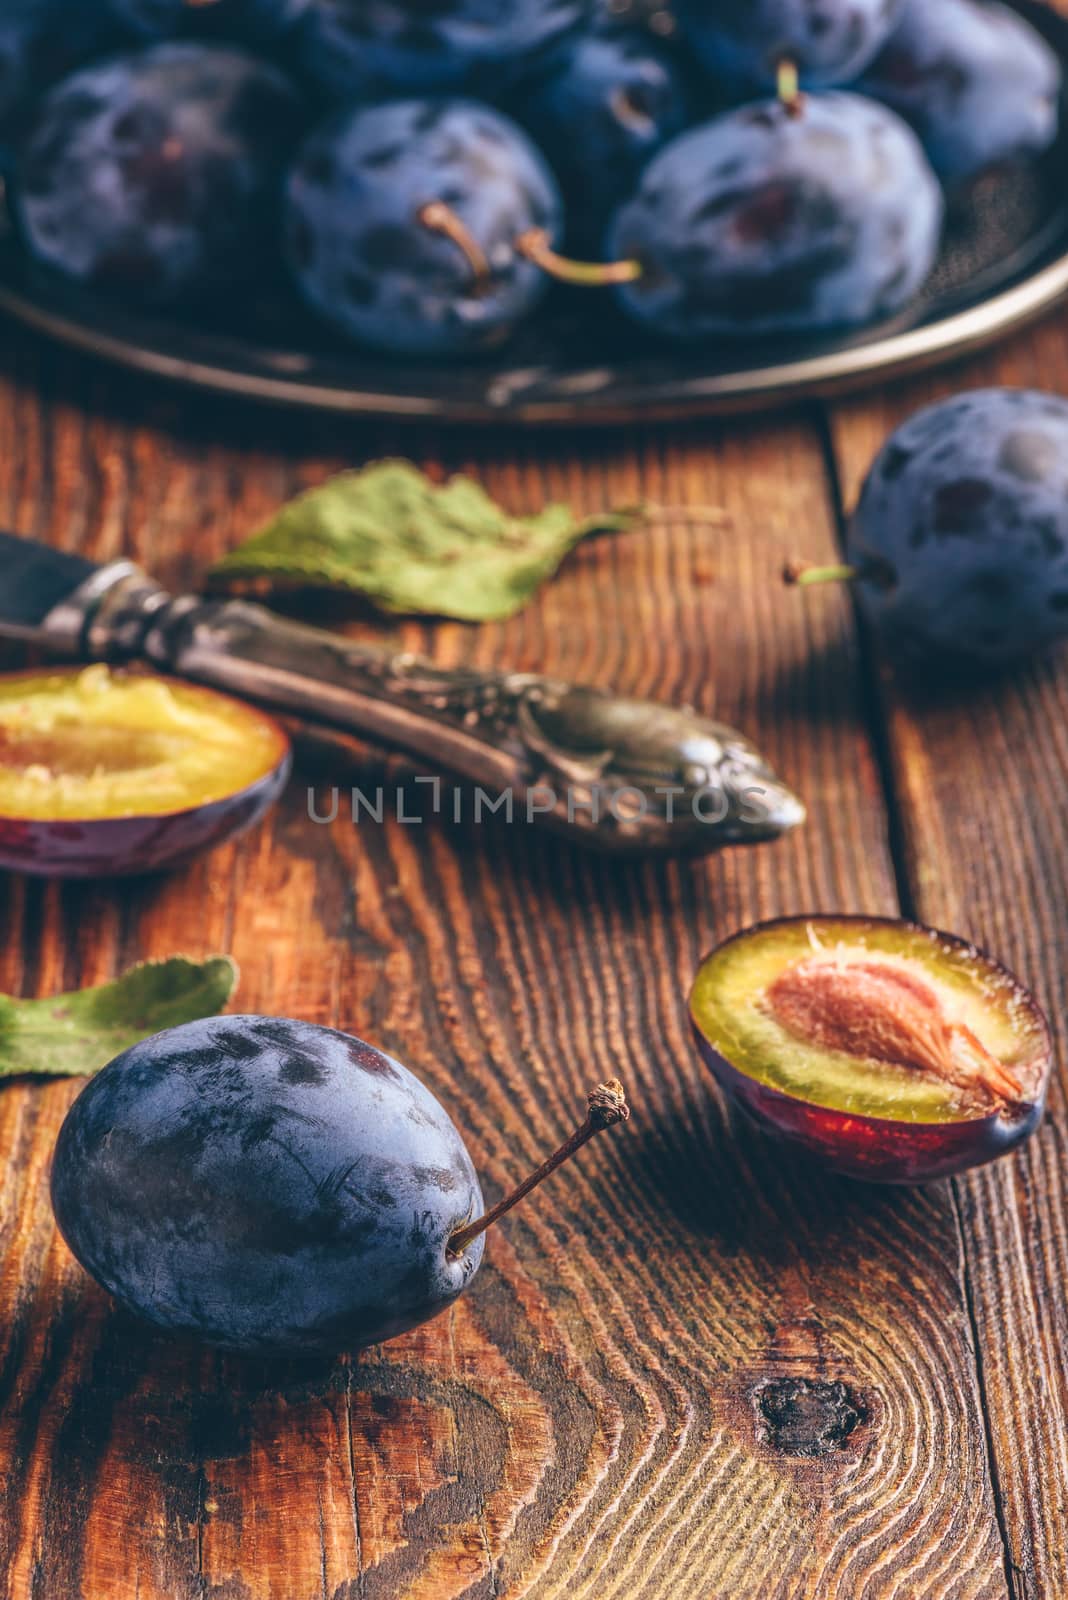 Ripe plums on metal tray and dark wooden surface with leaves and vintage knife